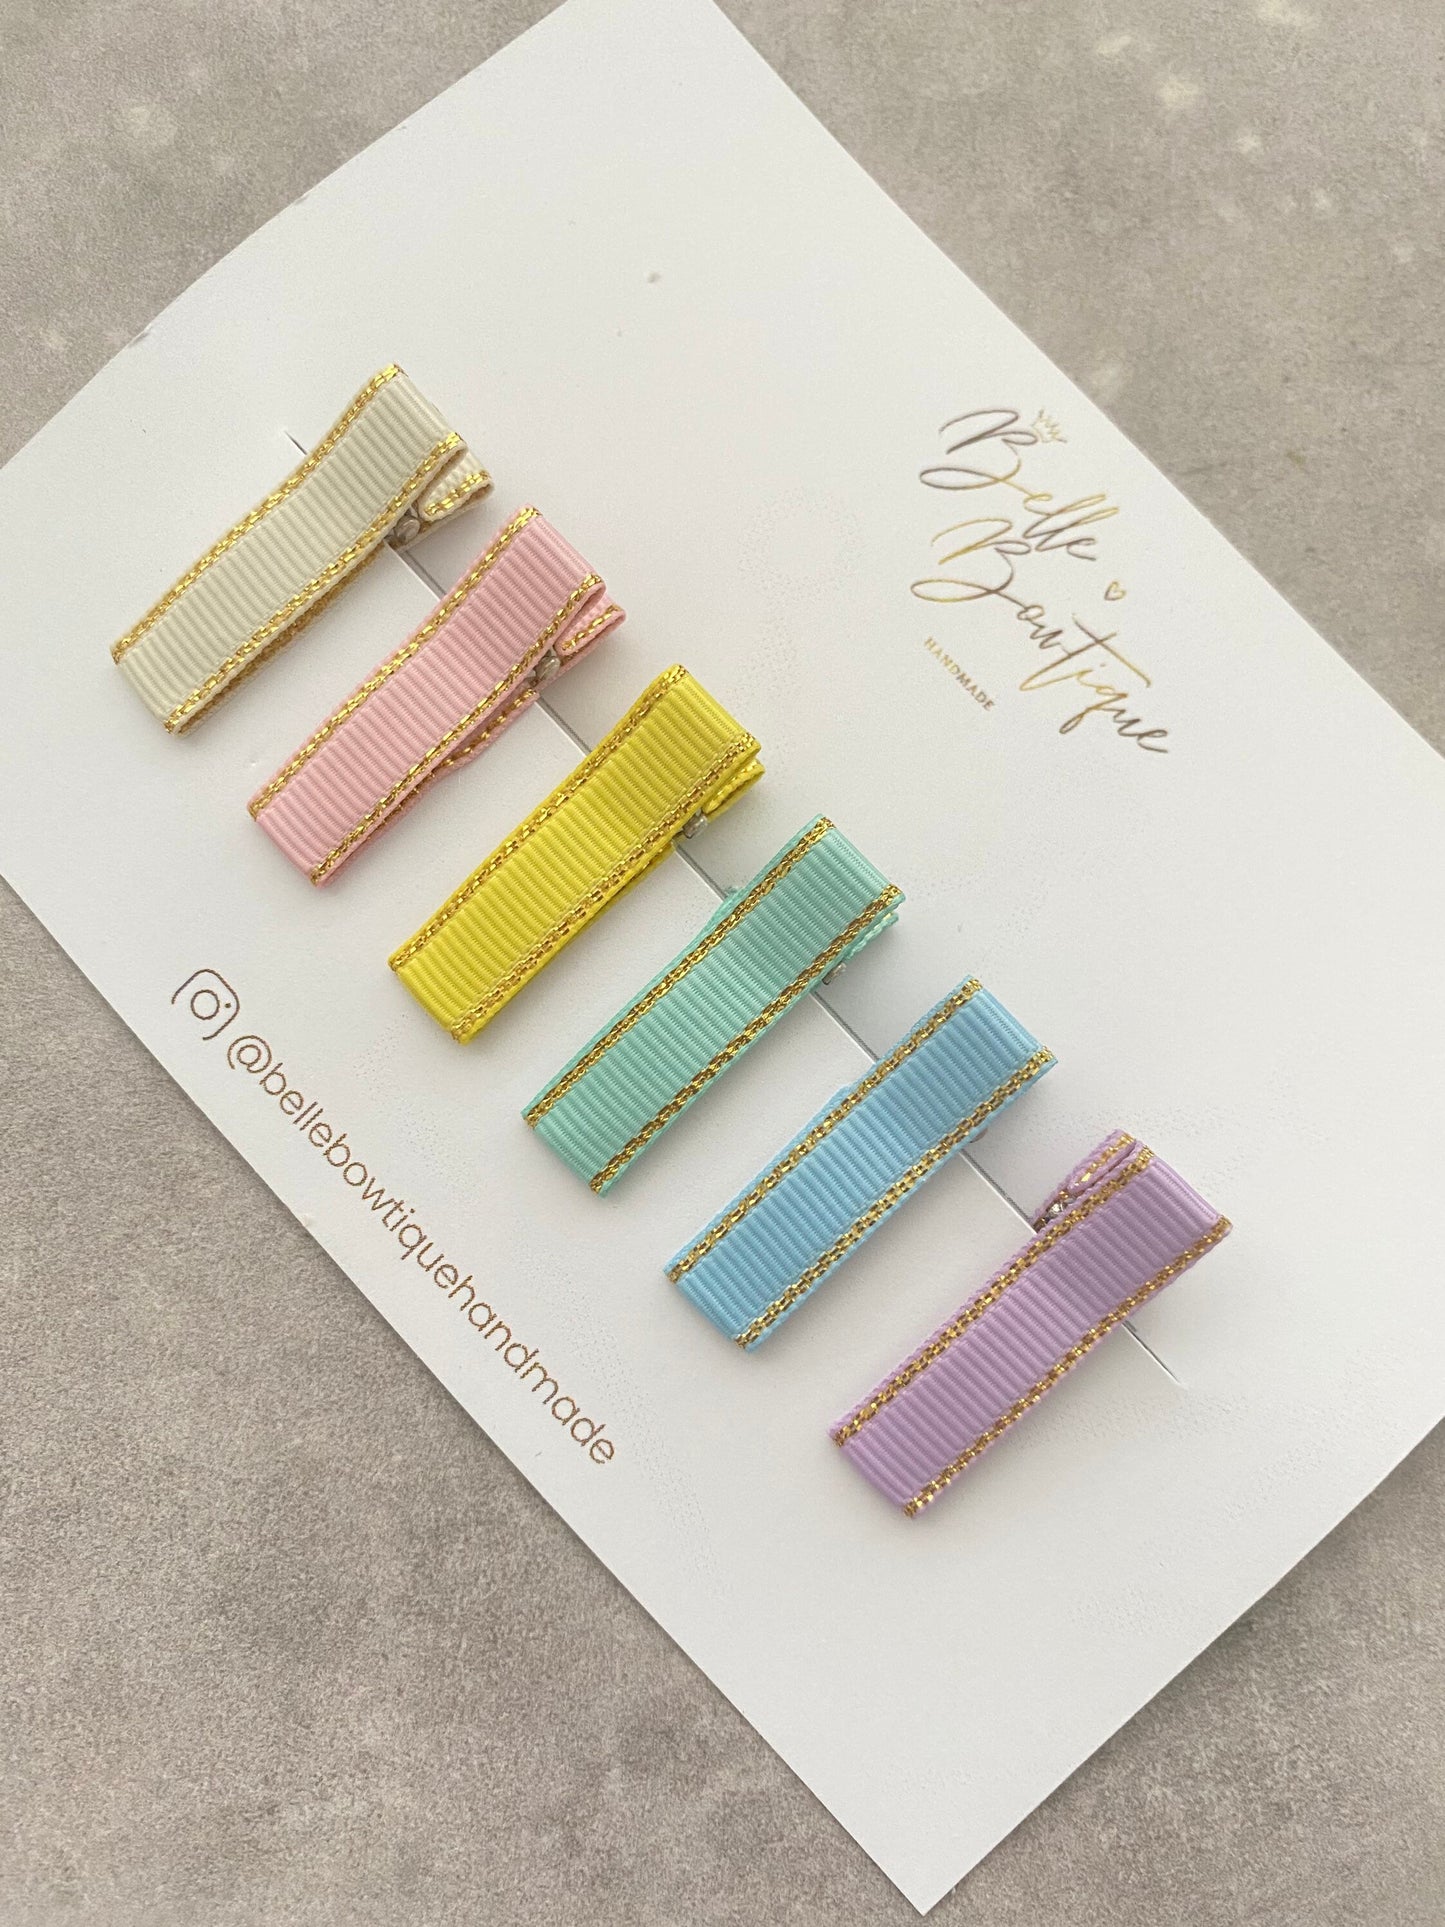 Rainbow ribbon fringe clips 6 - small clips - mini clips - Clip pack - baby hair clips - toddler hair clips - gold